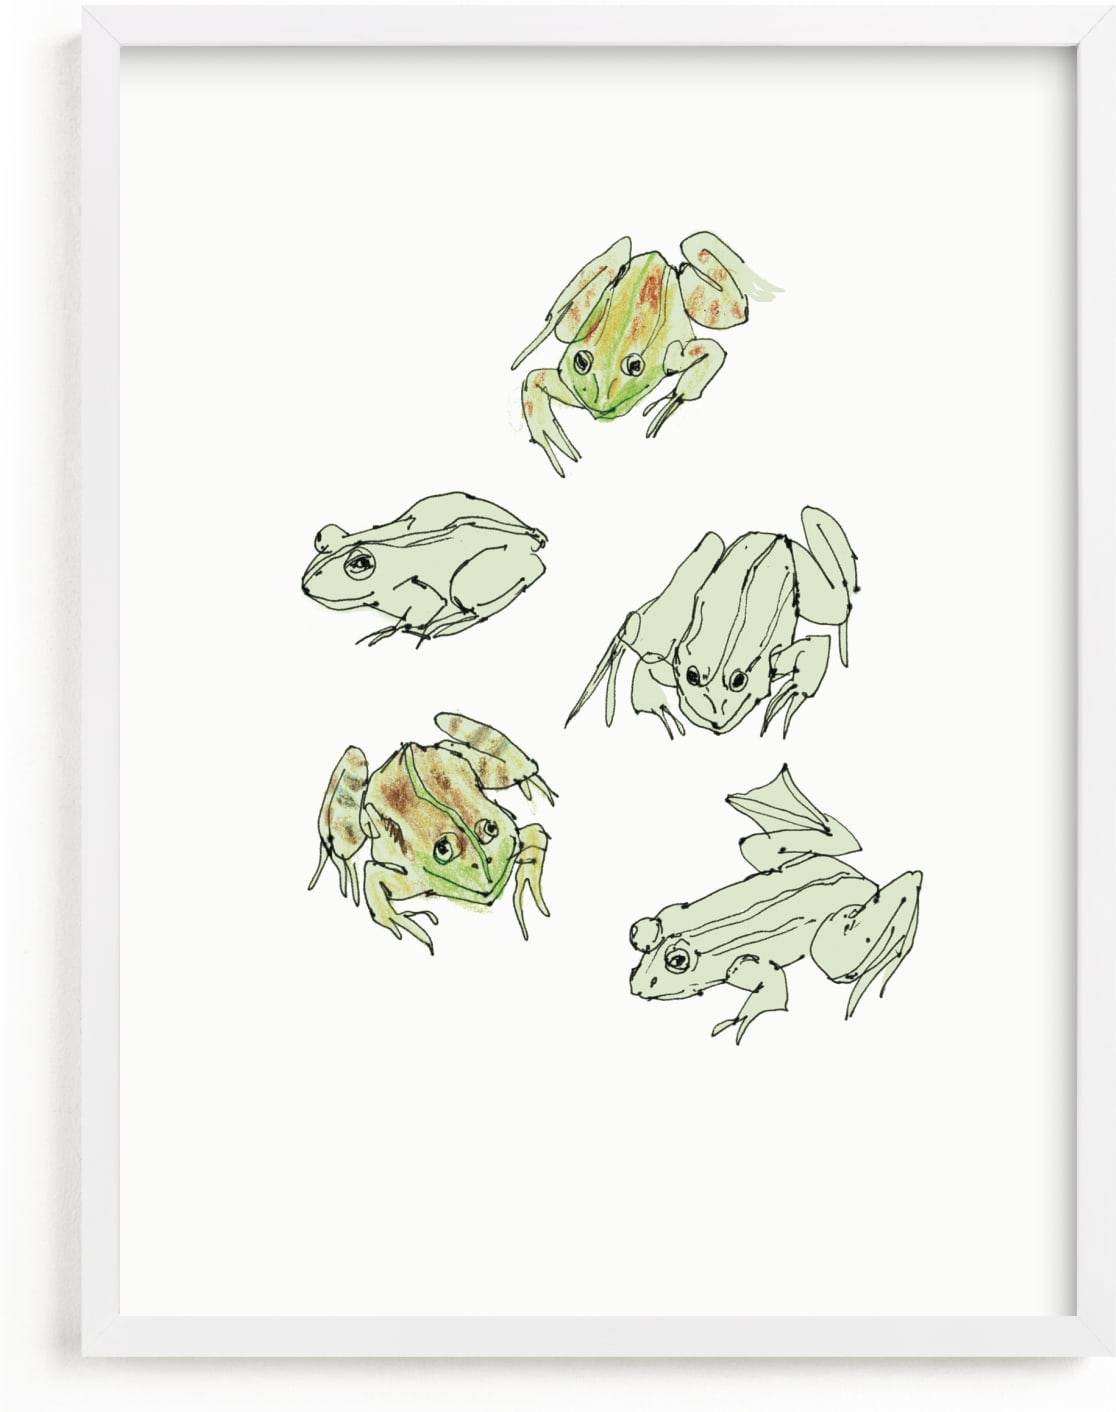 This is a ivory kids wall art by Catilustre called Frog sketches.